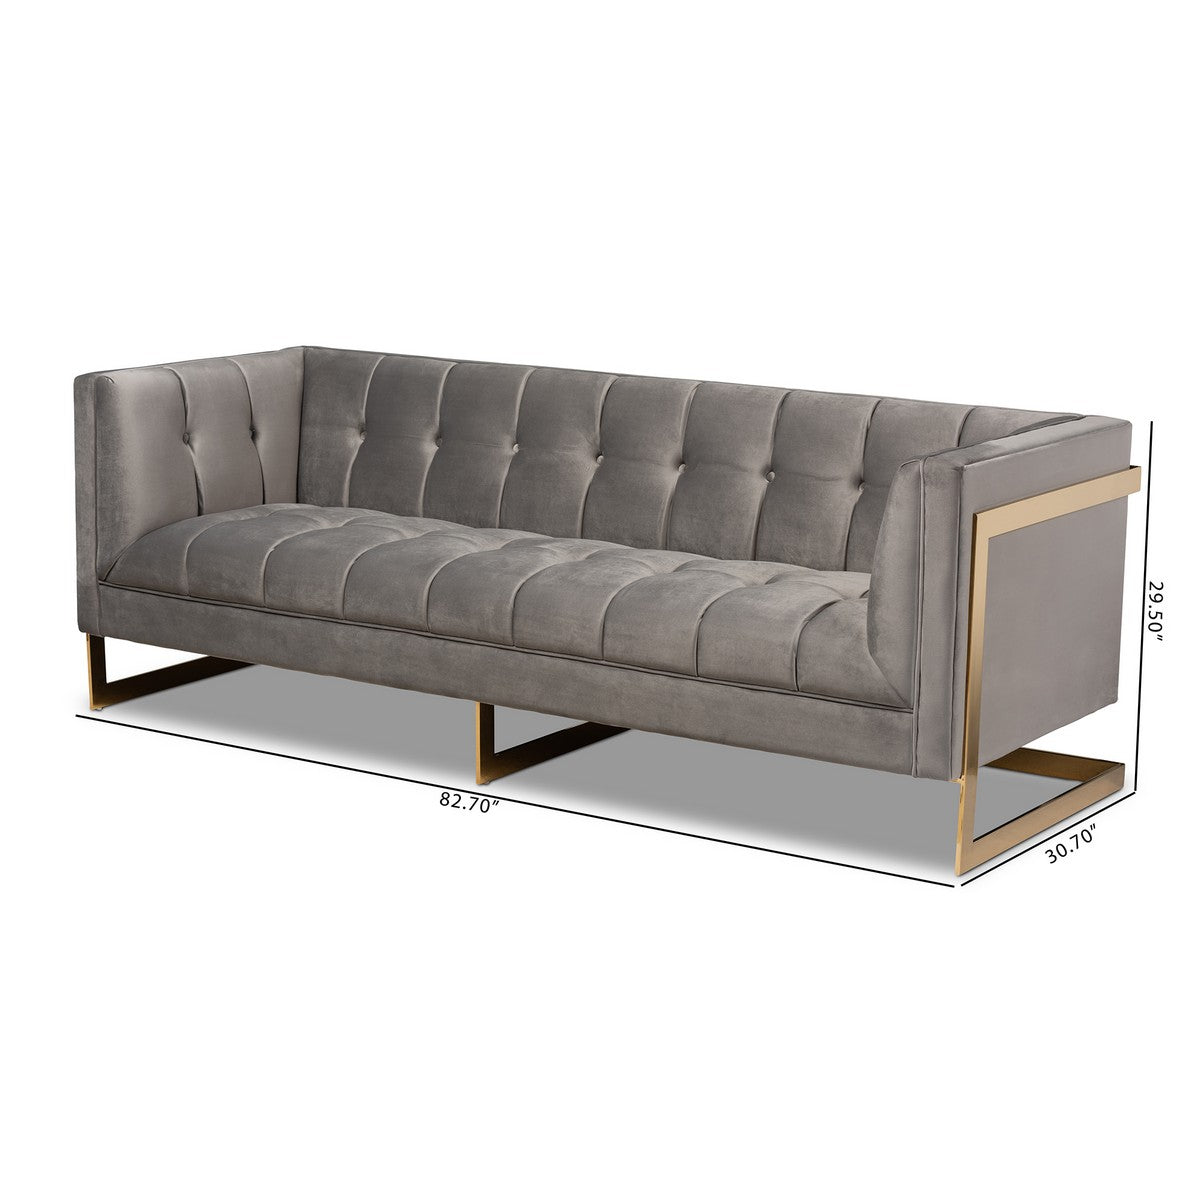 Baxton Studio Ambra Glam and Luxe Grey Velvet Fabric Upholstered and Button Tufted Sofa with Gold-Tone Frame